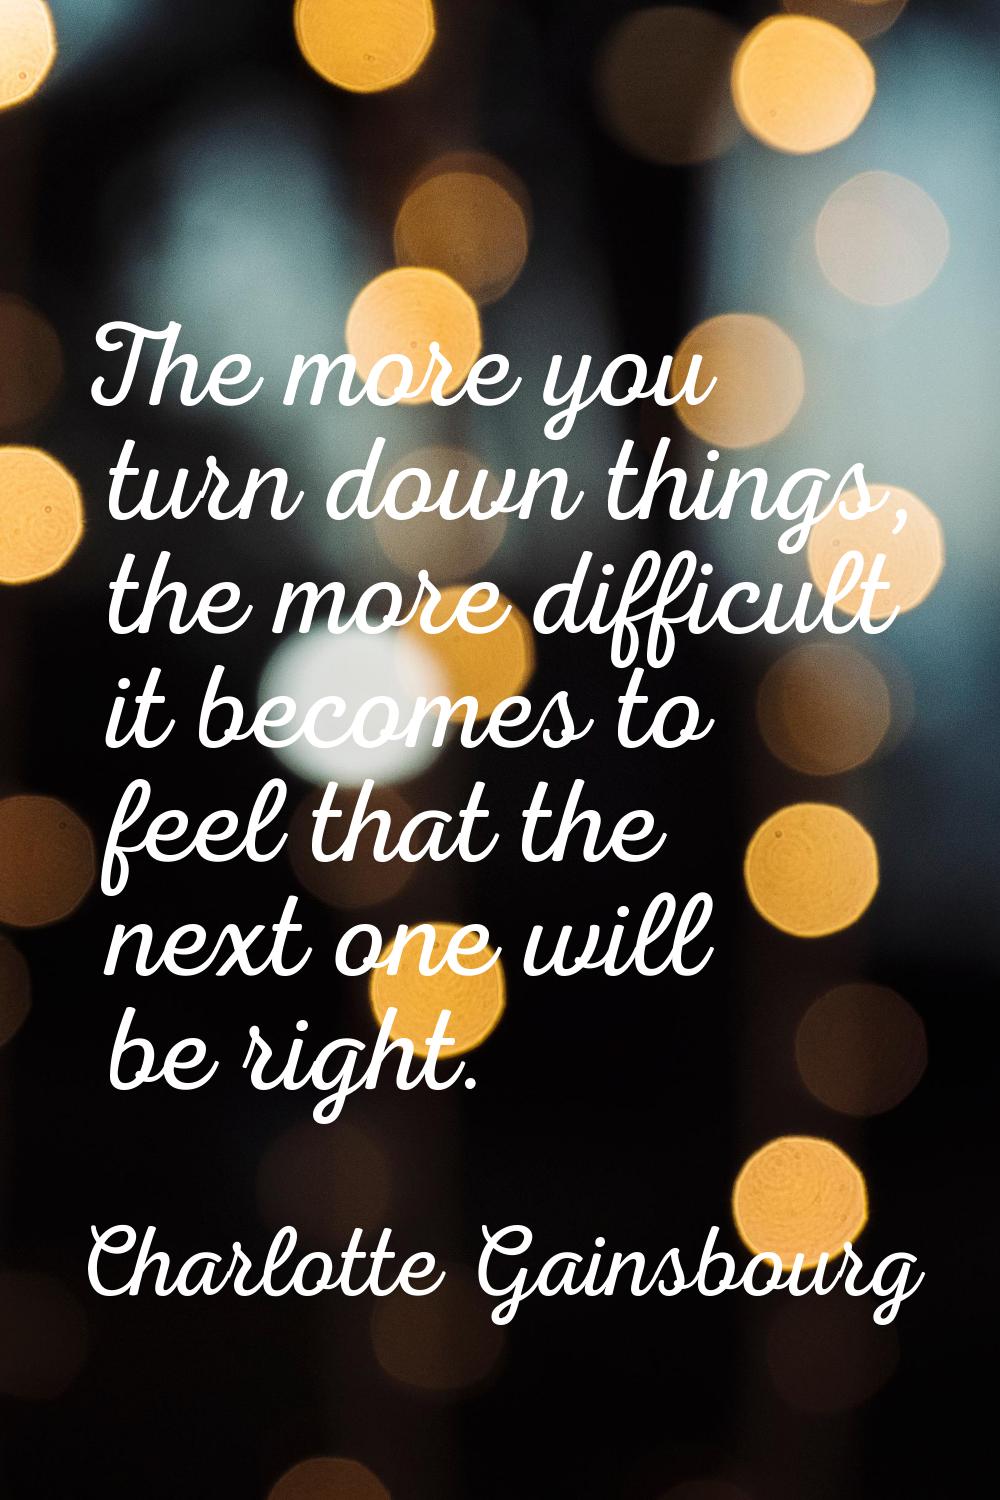 The more you turn down things, the more difficult it becomes to feel that the next one will be righ